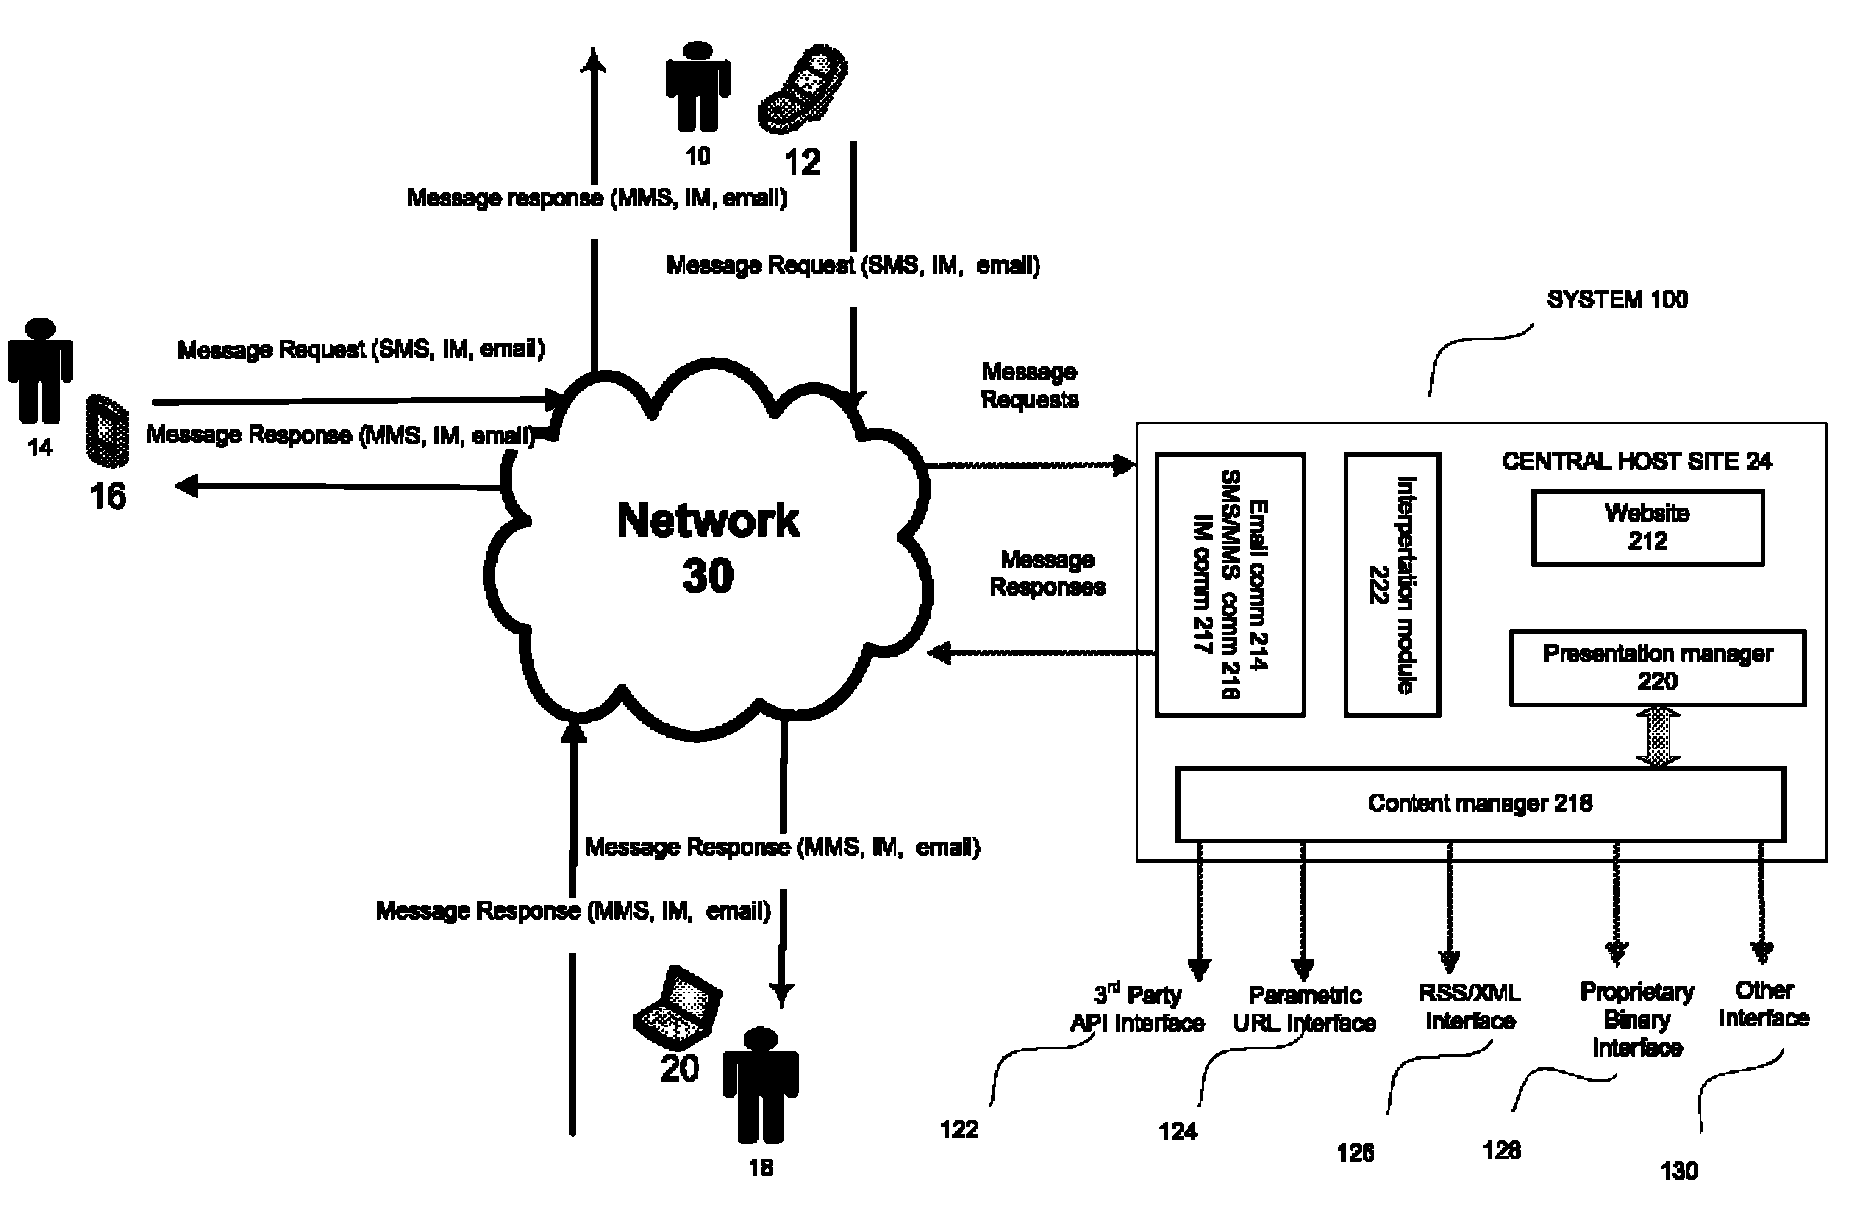 System and method for responding to information requests from users of personal communication devices